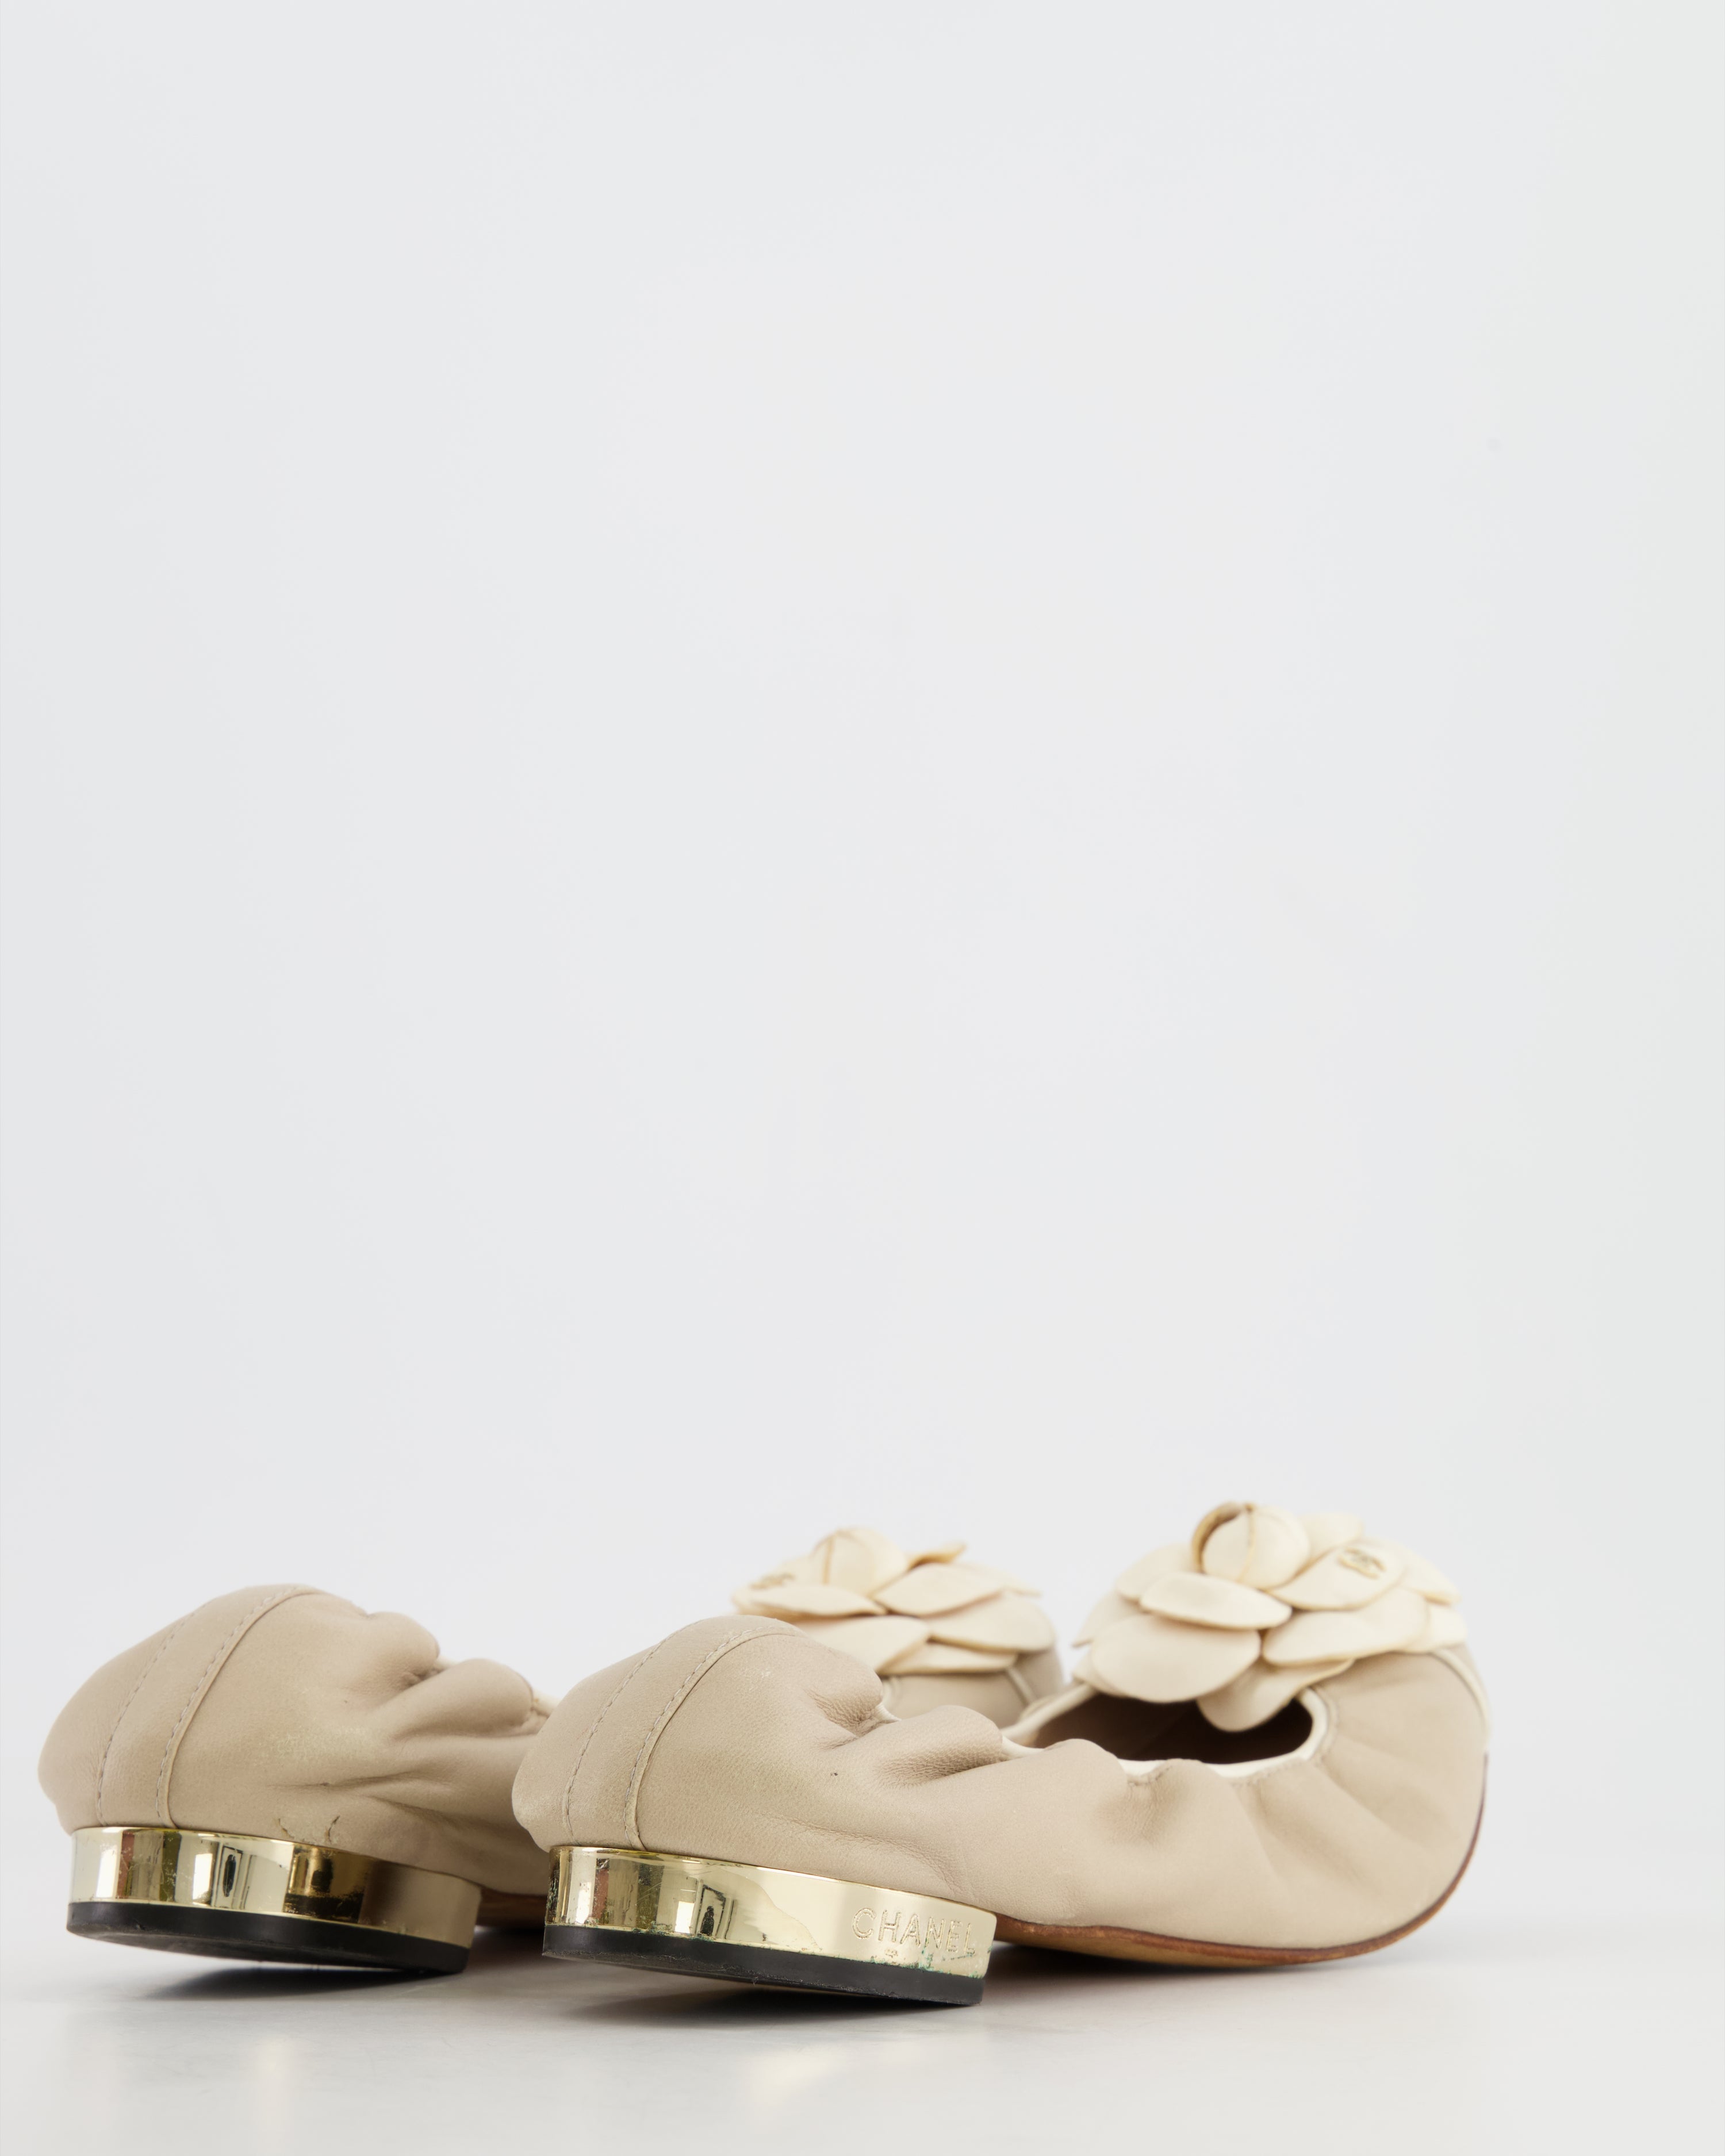 SLASH PRICE* Chanel Beige and White Leather Camélia Elasticated Ballerina with Gold CC Logo Detail Size EU 39